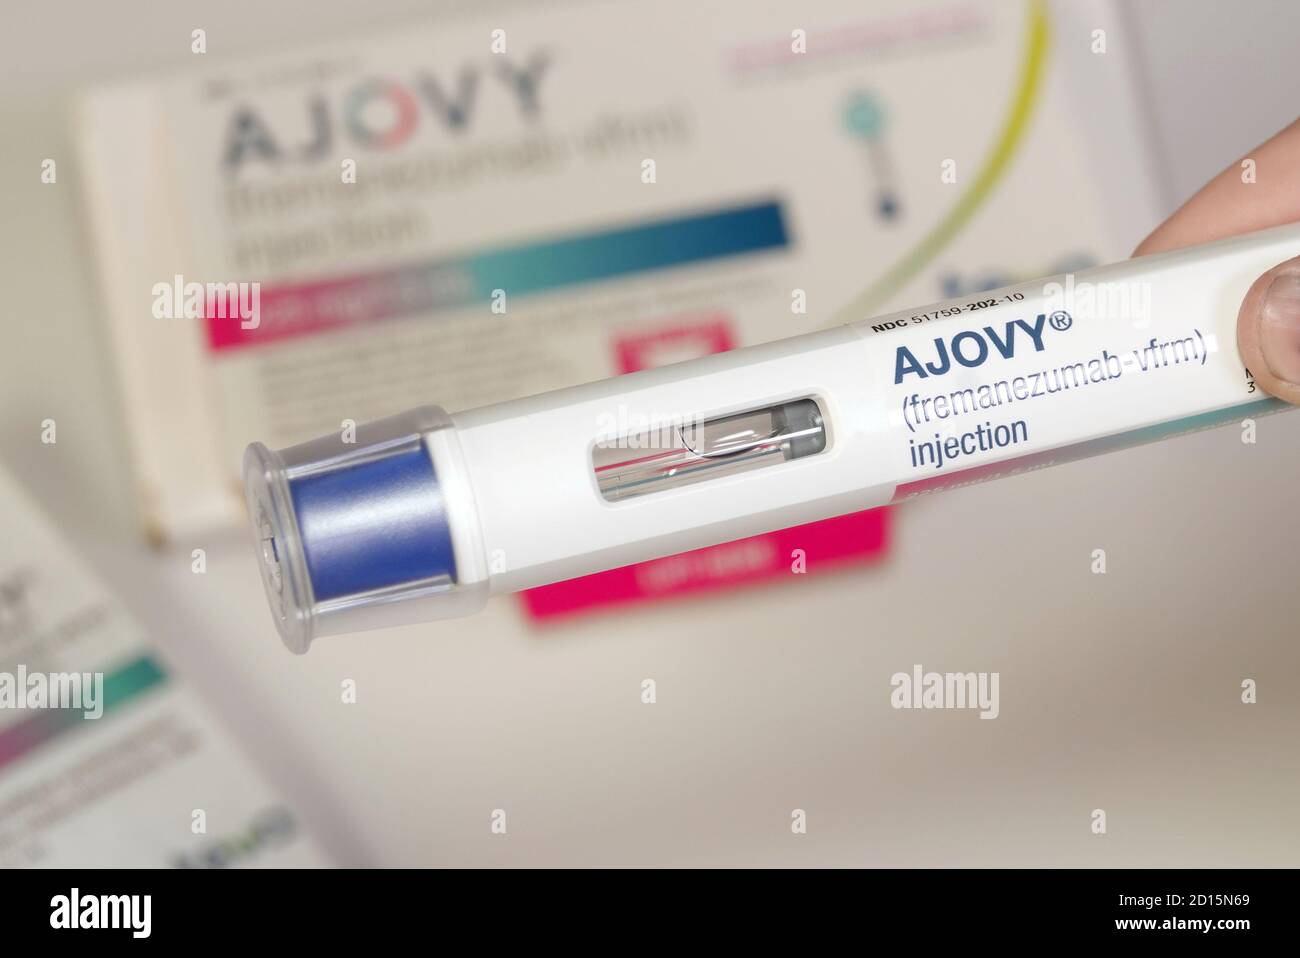 Ajovy, one of four newly FDA approved migraine preventatives. Close up of the auto injector held up in front of product packaging. Stock Photo